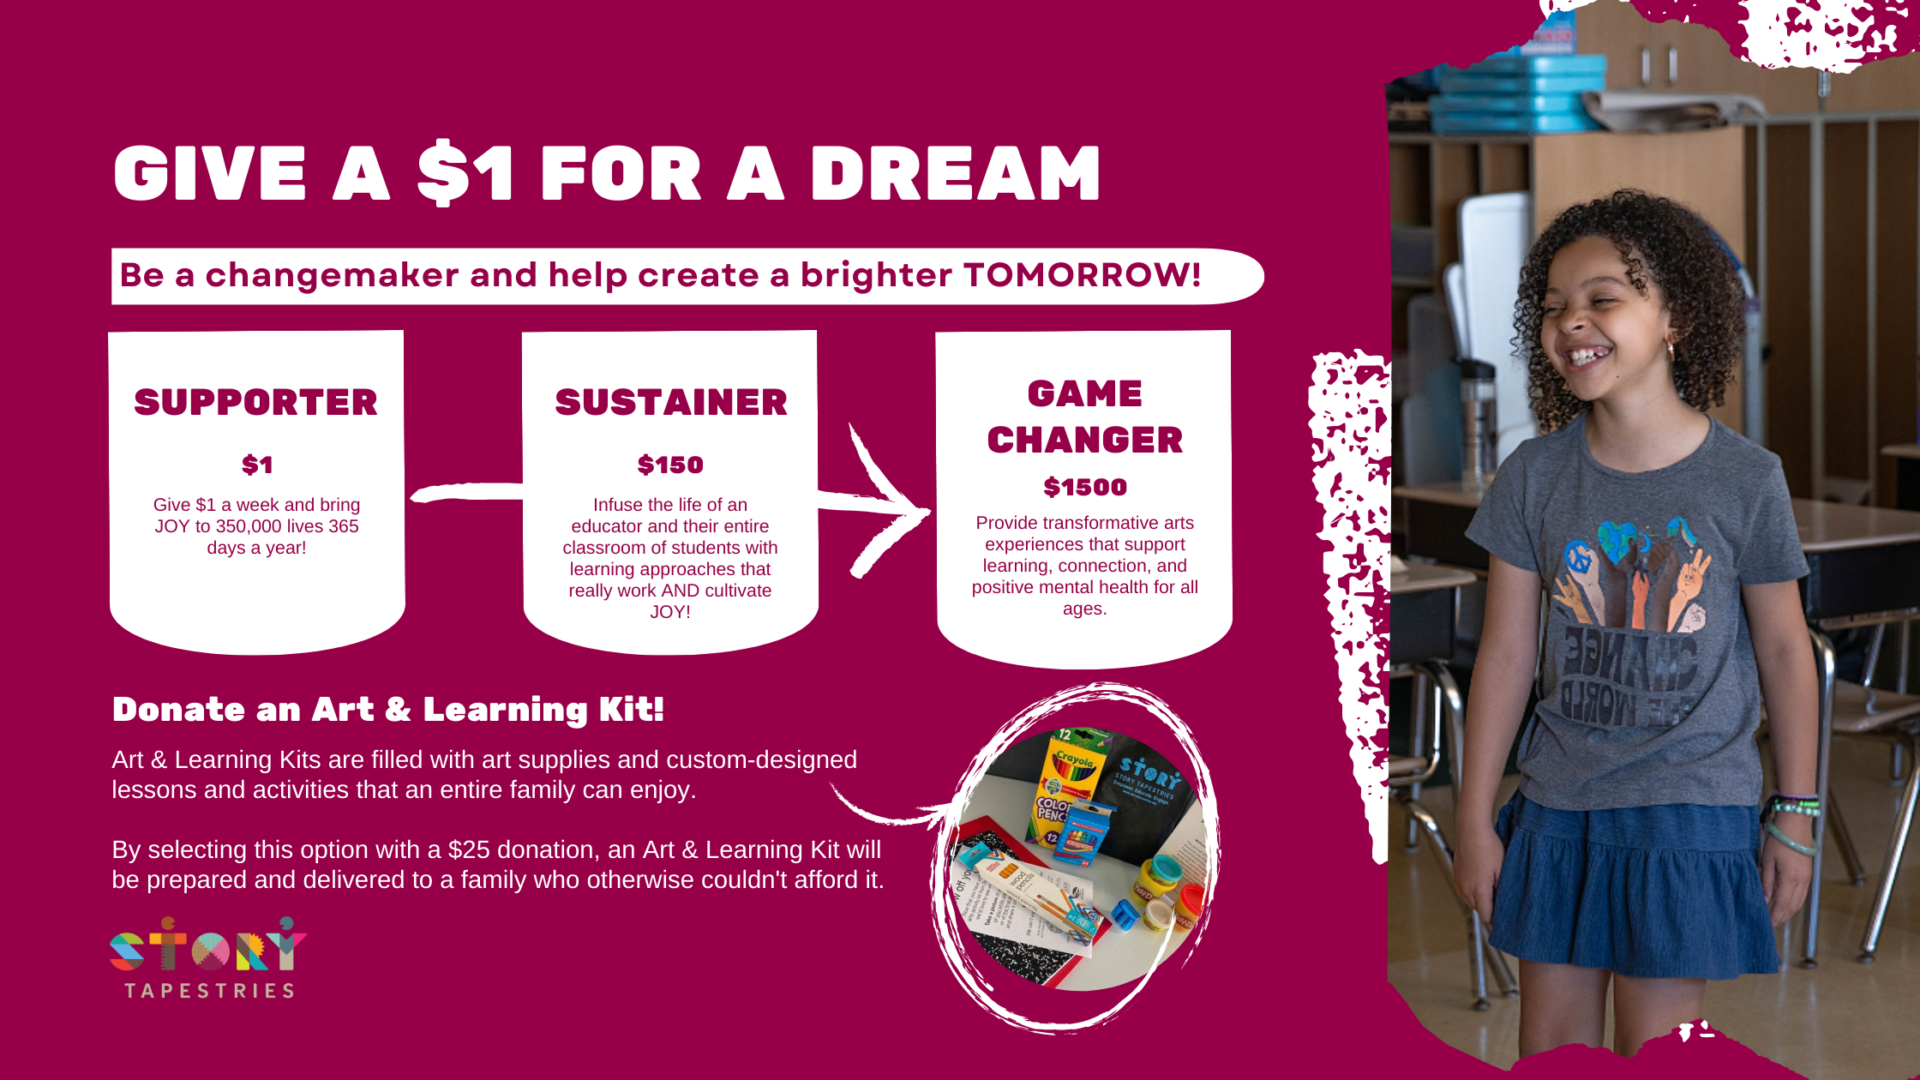 Give a $1 for a Dream Giving Levels - Supporter - Give $1 a week and bring JOY to 350,000 lives 365 days a year; Sustainer - $150 - Infuse the life of an educator and their entire classroom of students with learning approaches that really work AND cultivate JOY; Game Changer - $1,500 - Provide transformative arts experiences that support learning, connection, and positive mental health for all ages. Donate an Art & Learning Kit! Art & Learning Kits are filled with arts supplies and custom-designed lessons and activities that an entire family can enjoy. By selecting this option with a $25 donation, an Art & Learning Kit will be prepared and delivered to a family who otherwise couldn't afford it.